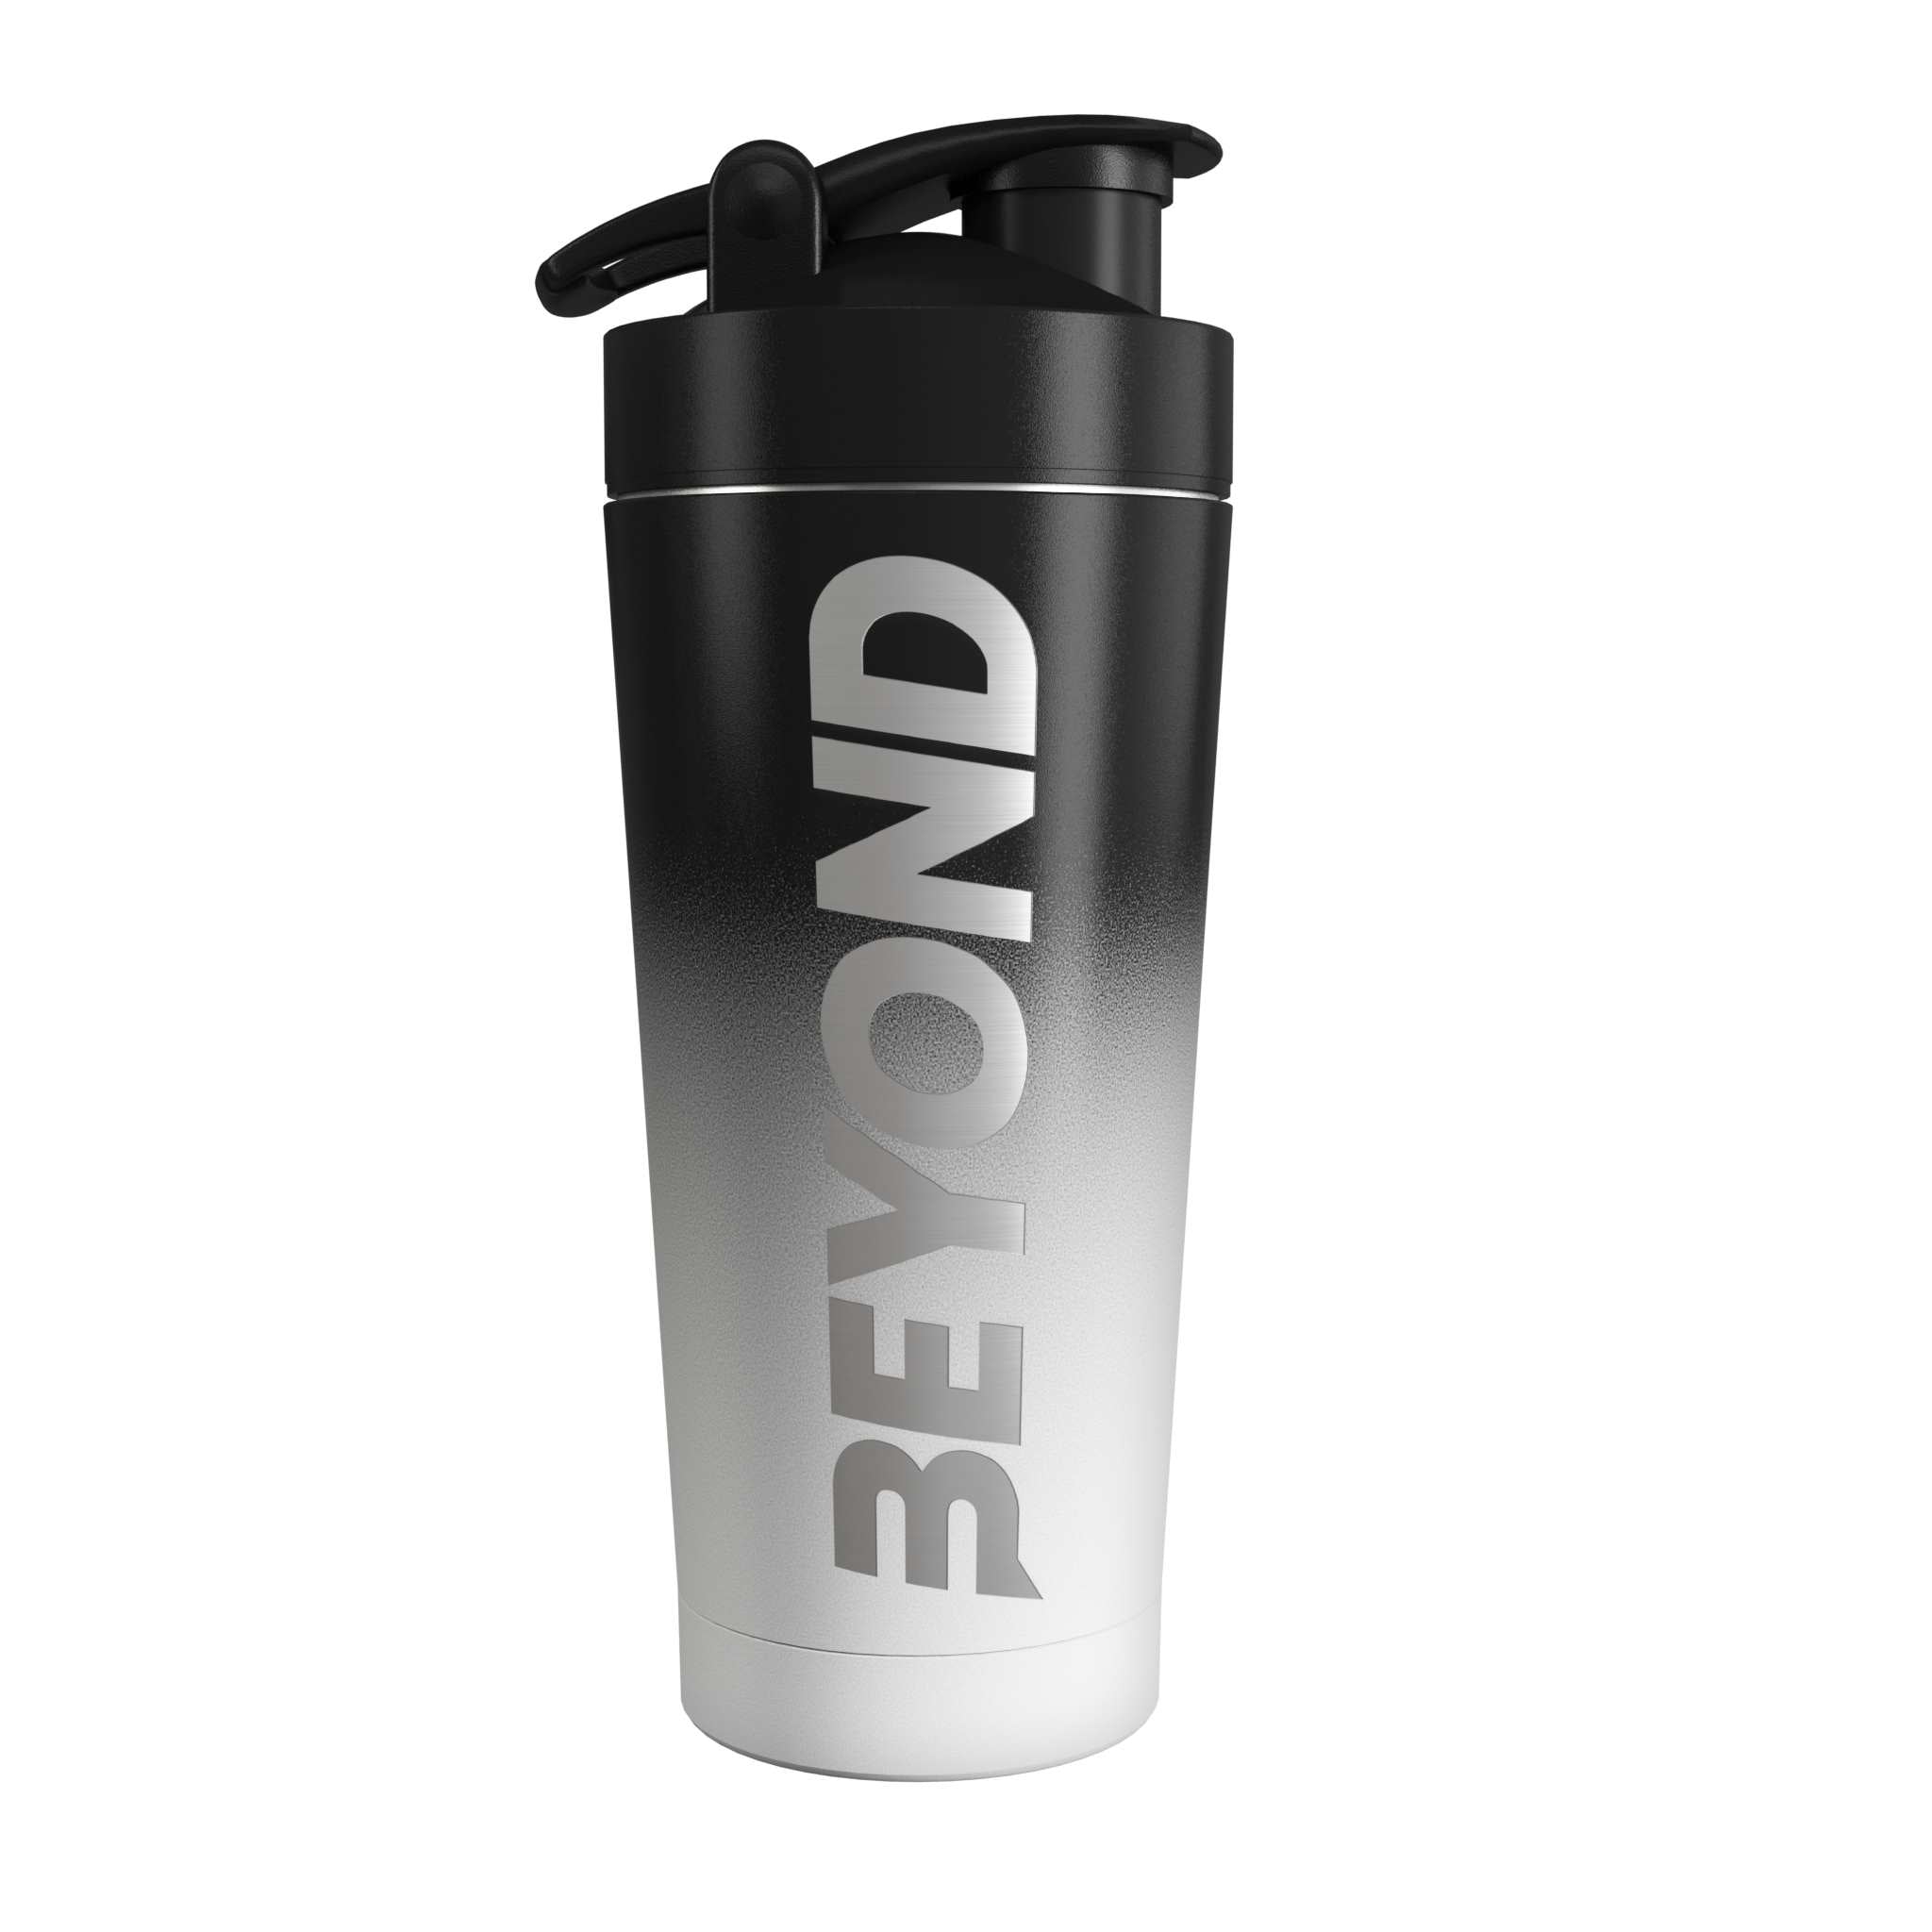 Anytime Fitness Palm Coast - In the market for a new Blender Bottle?? We  just got the new Radian Insulated Stainless Steel bottles!! We have all 3  colors (black, white and copper)